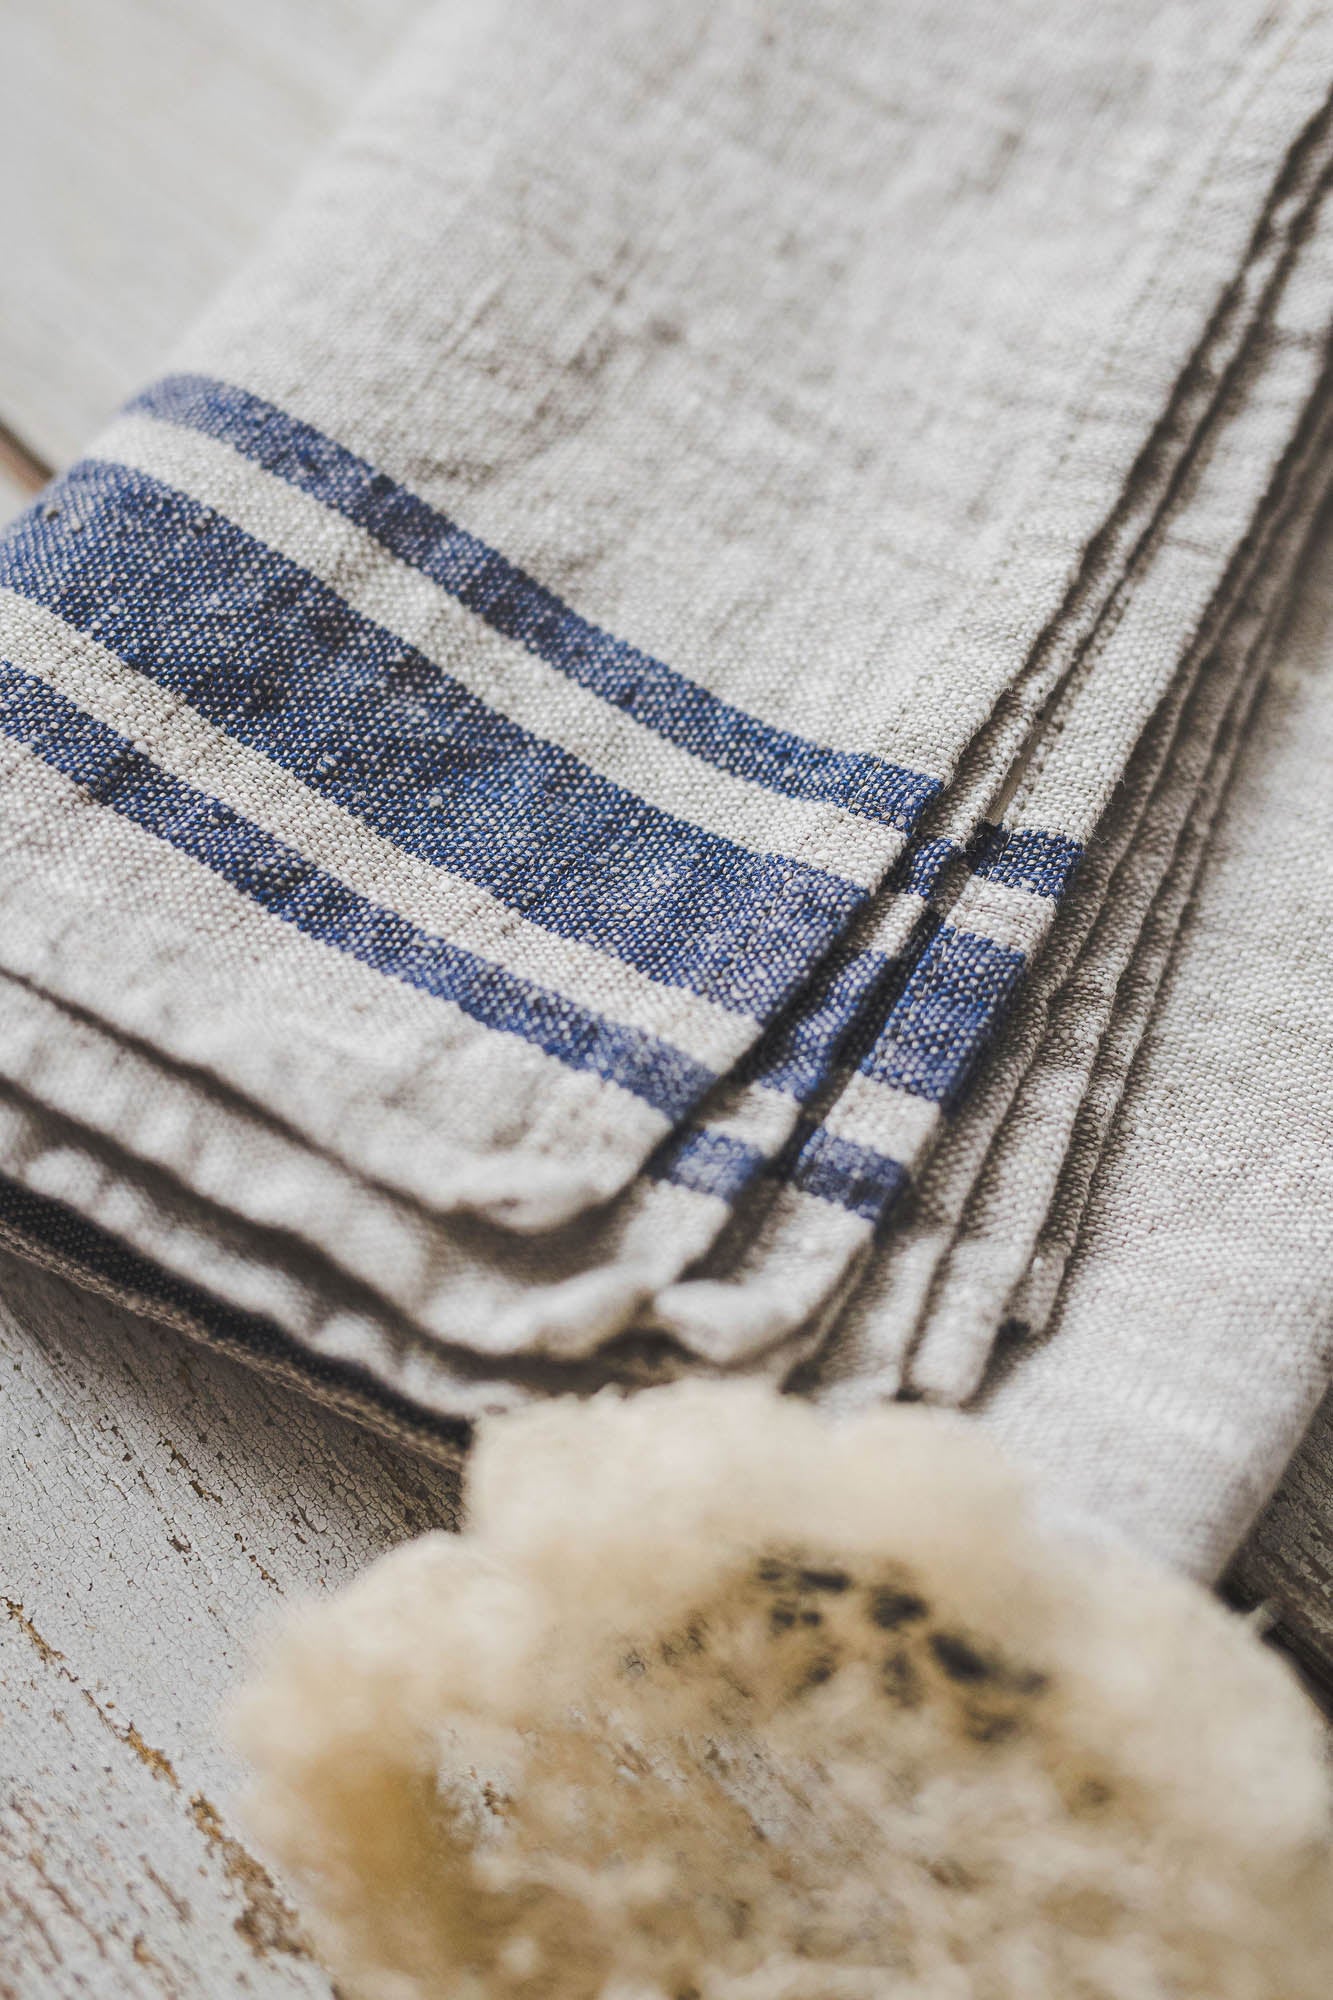 Linen towels with blue stripes - set of 2